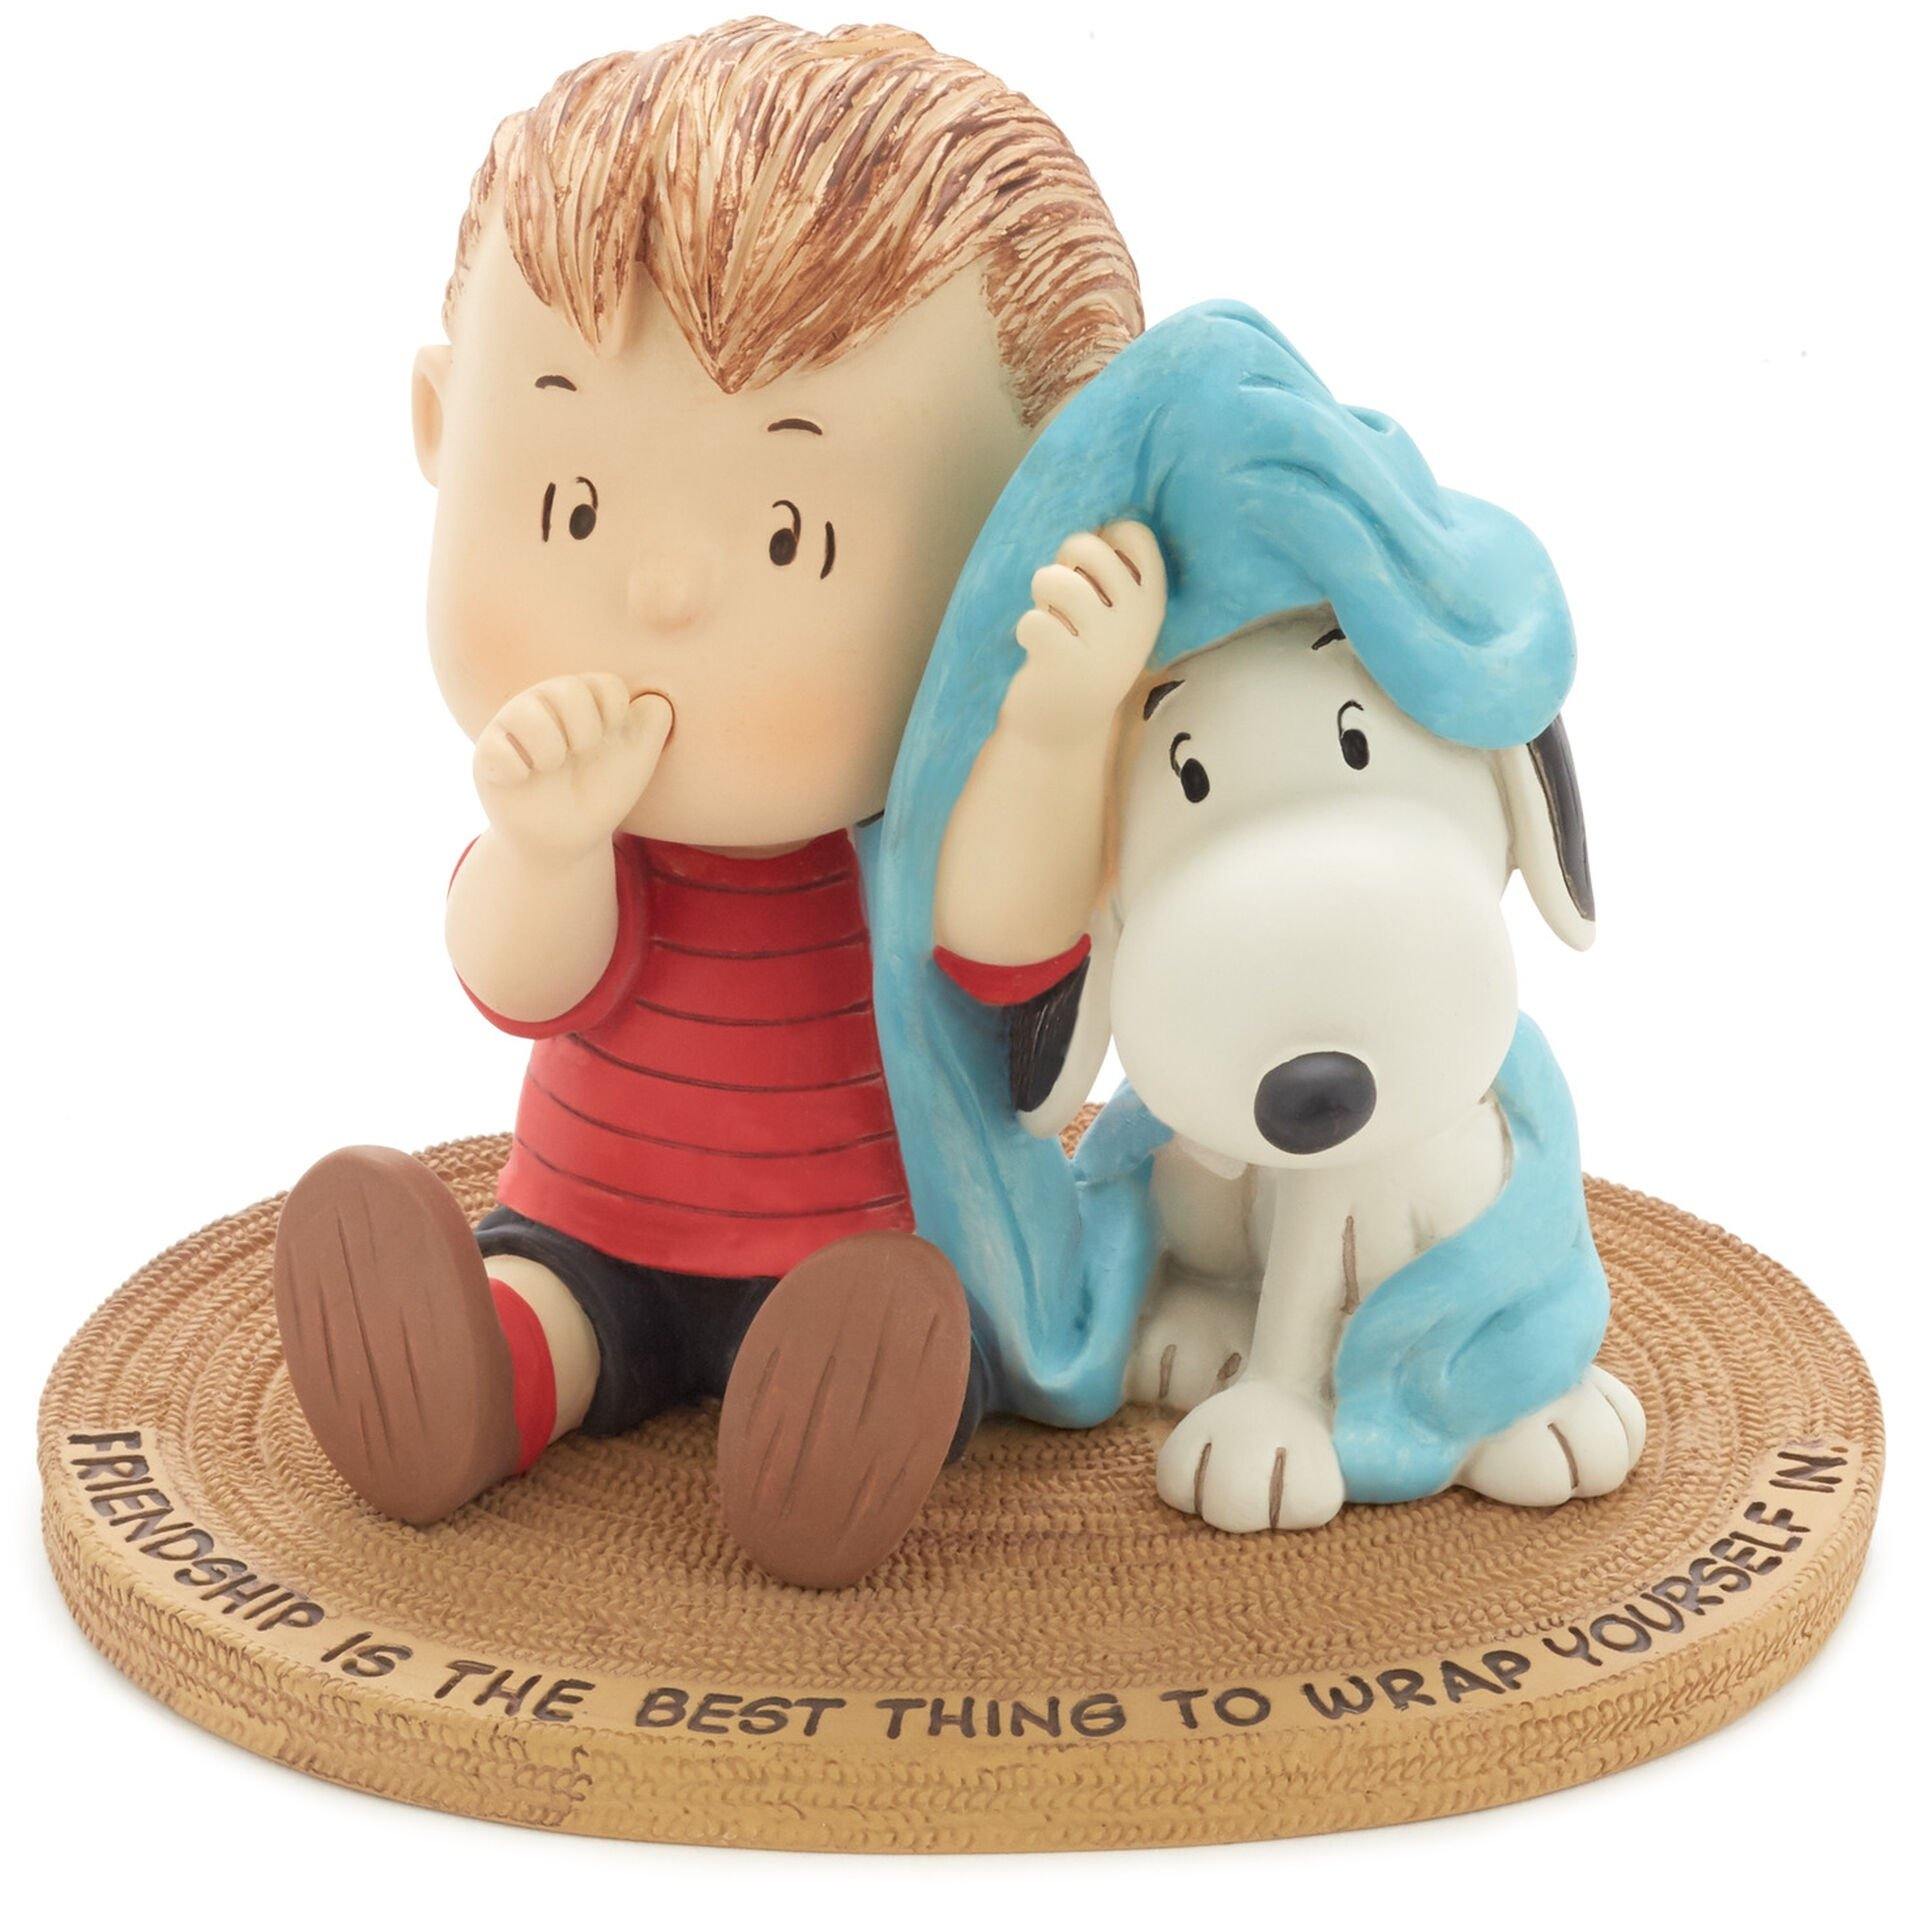 Peanuts® Linus and Snoopy Wrapped in Friendship Mini Figurine, 3.88"